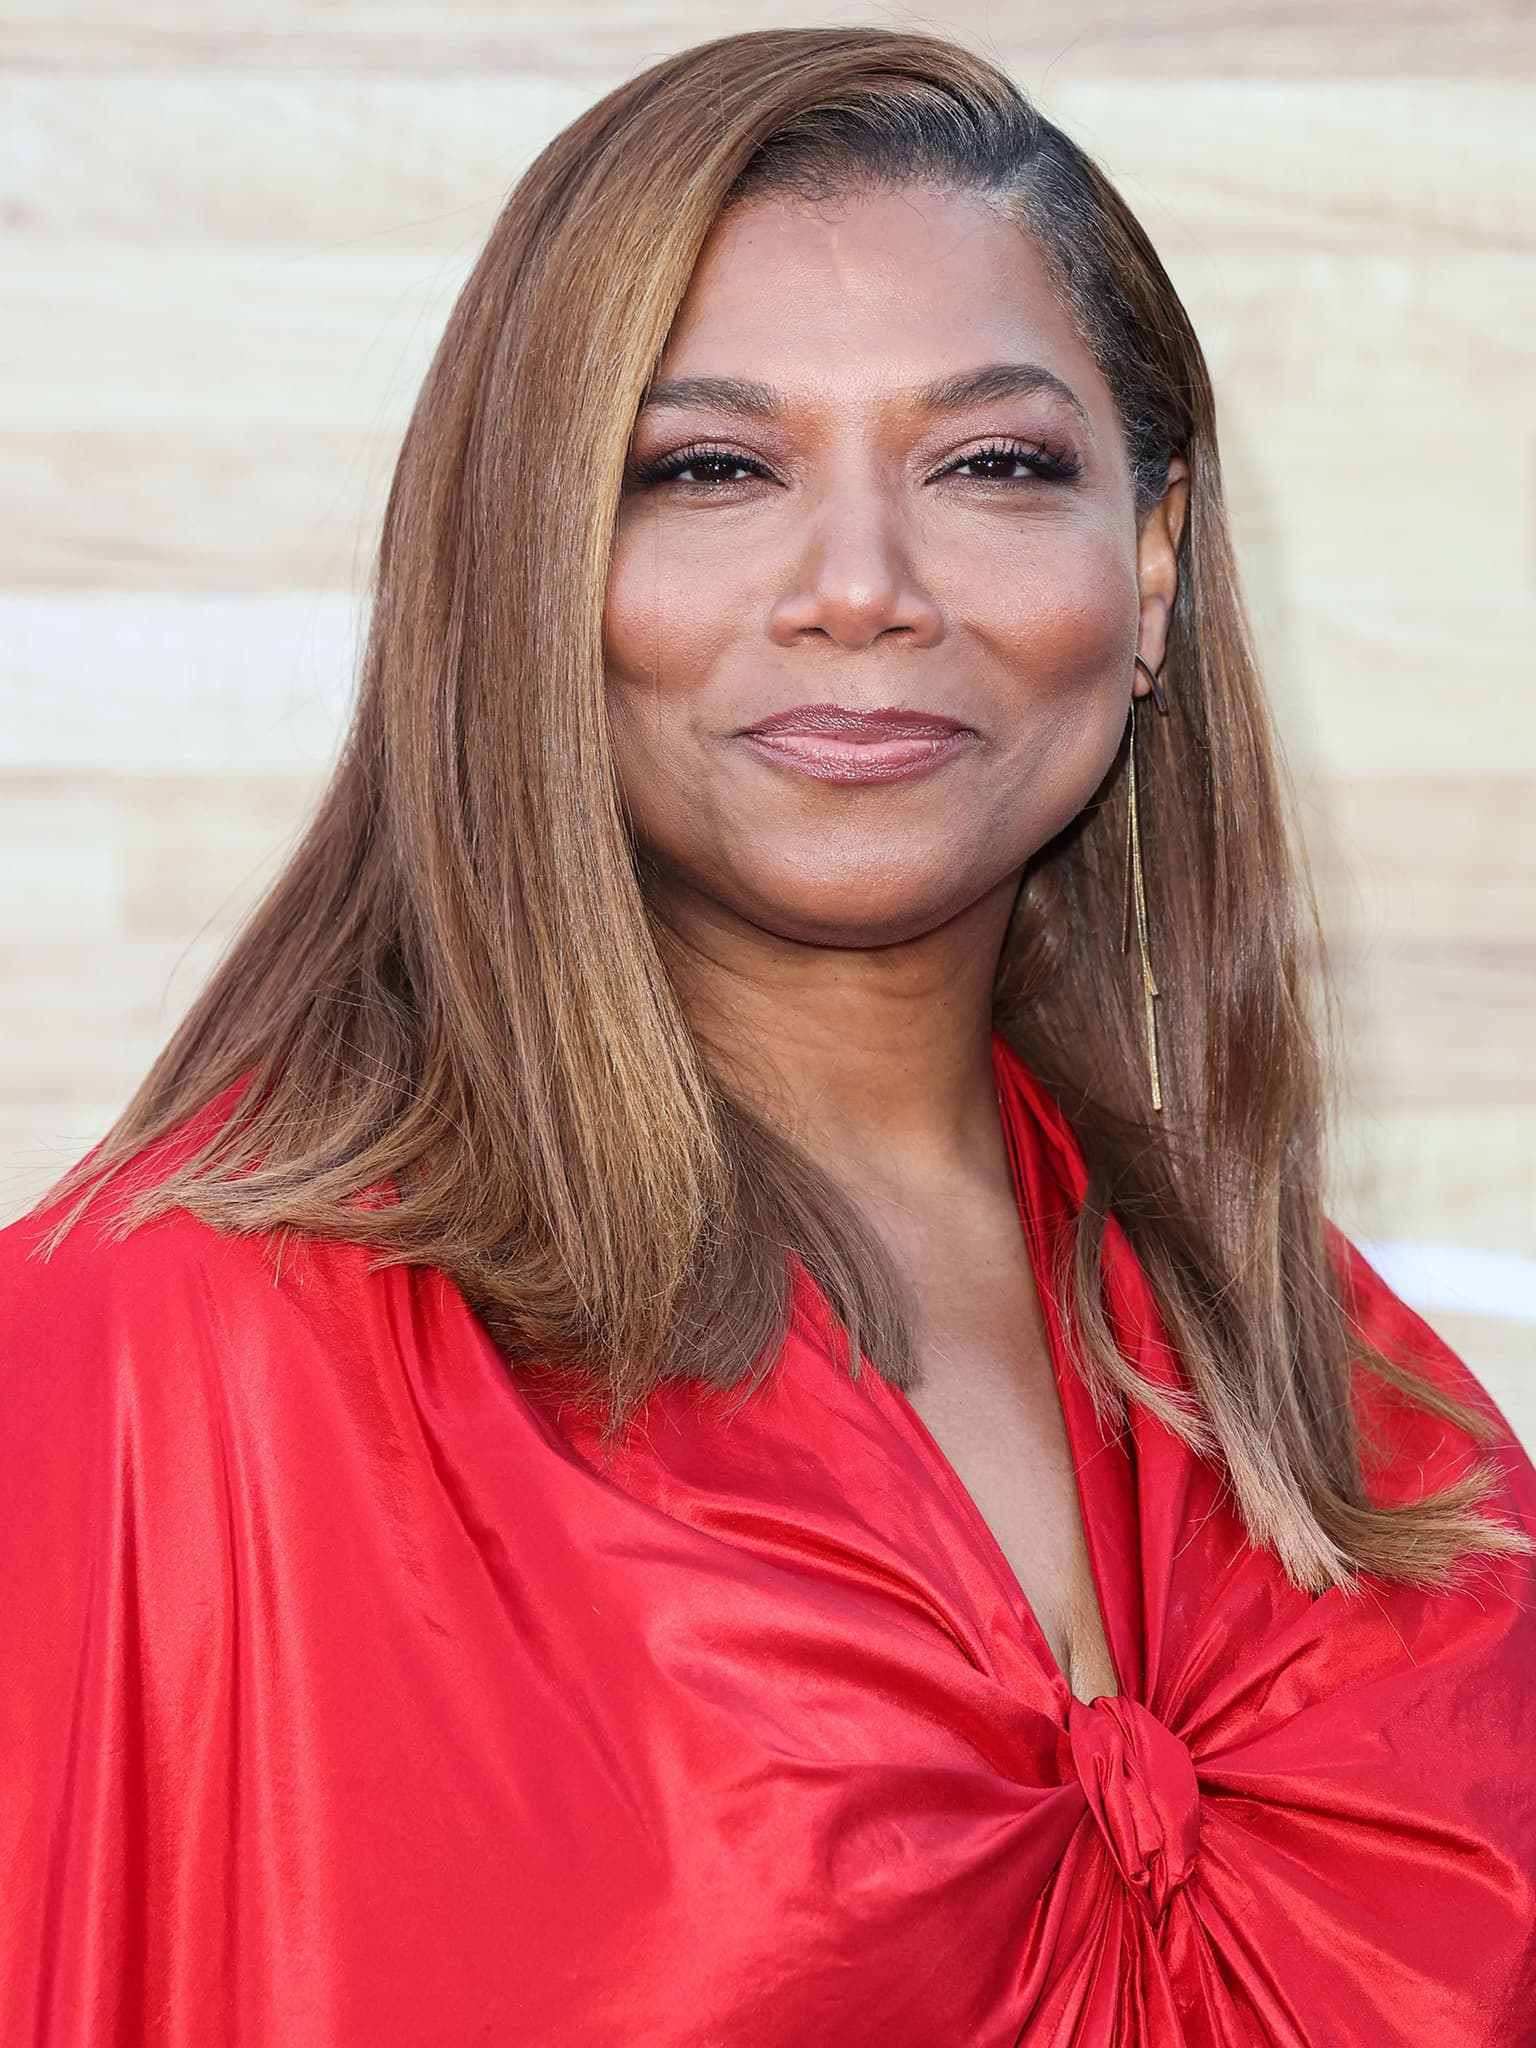 Queen Latifah At Netflix'S Hustle Premiere At The Regency Village Theater In Los Angeles On June 1, 2022